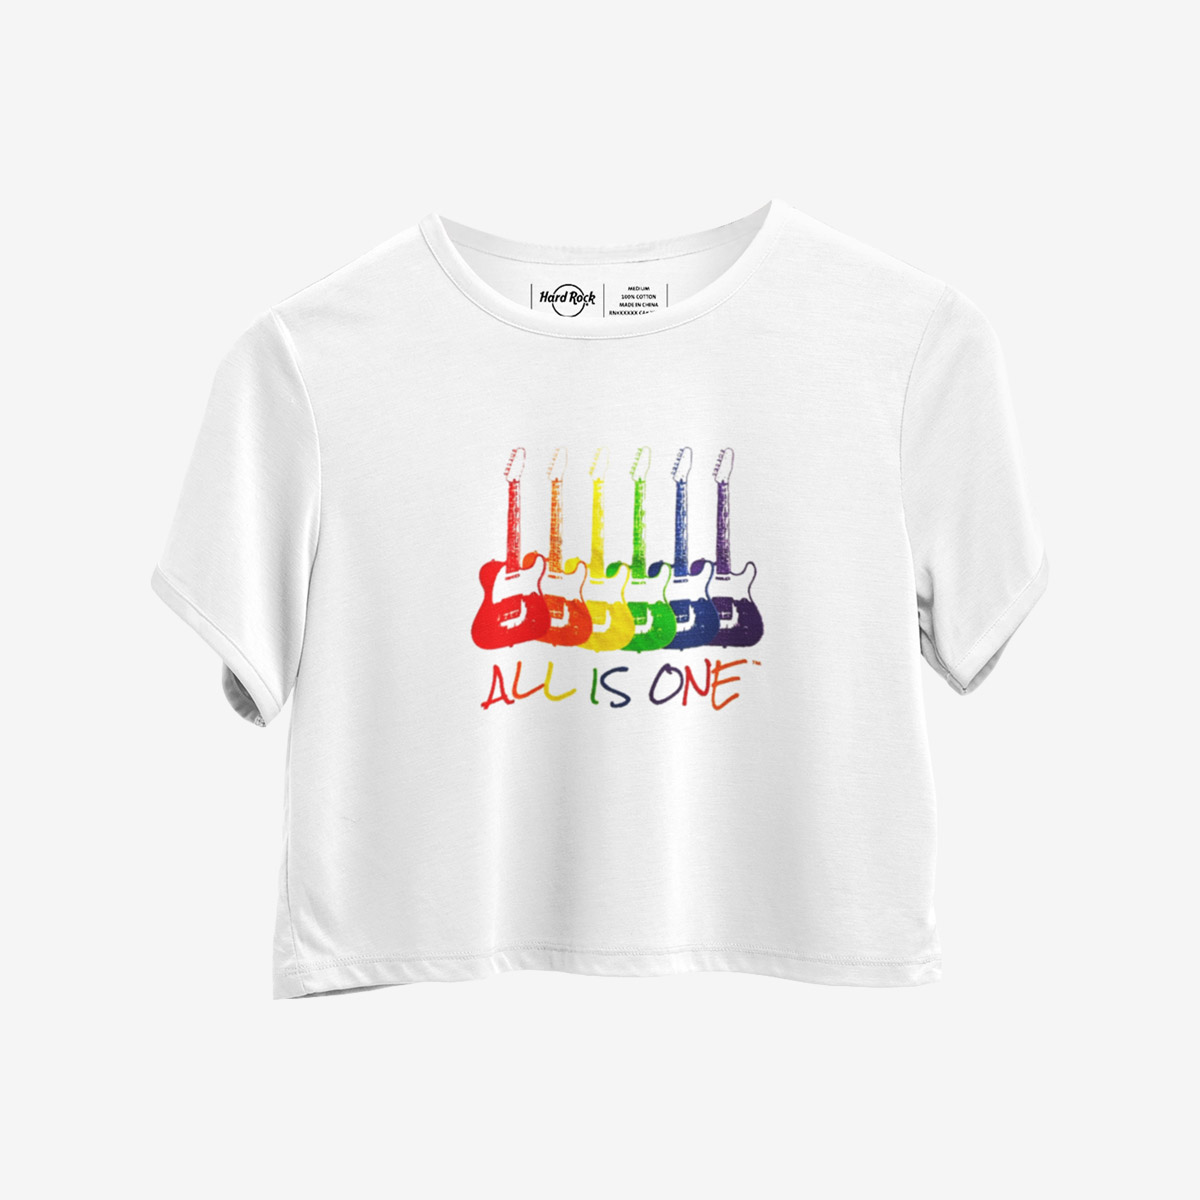 Retro Cropped Top Tee with Rainbow Guitars All Is One Design image number 5